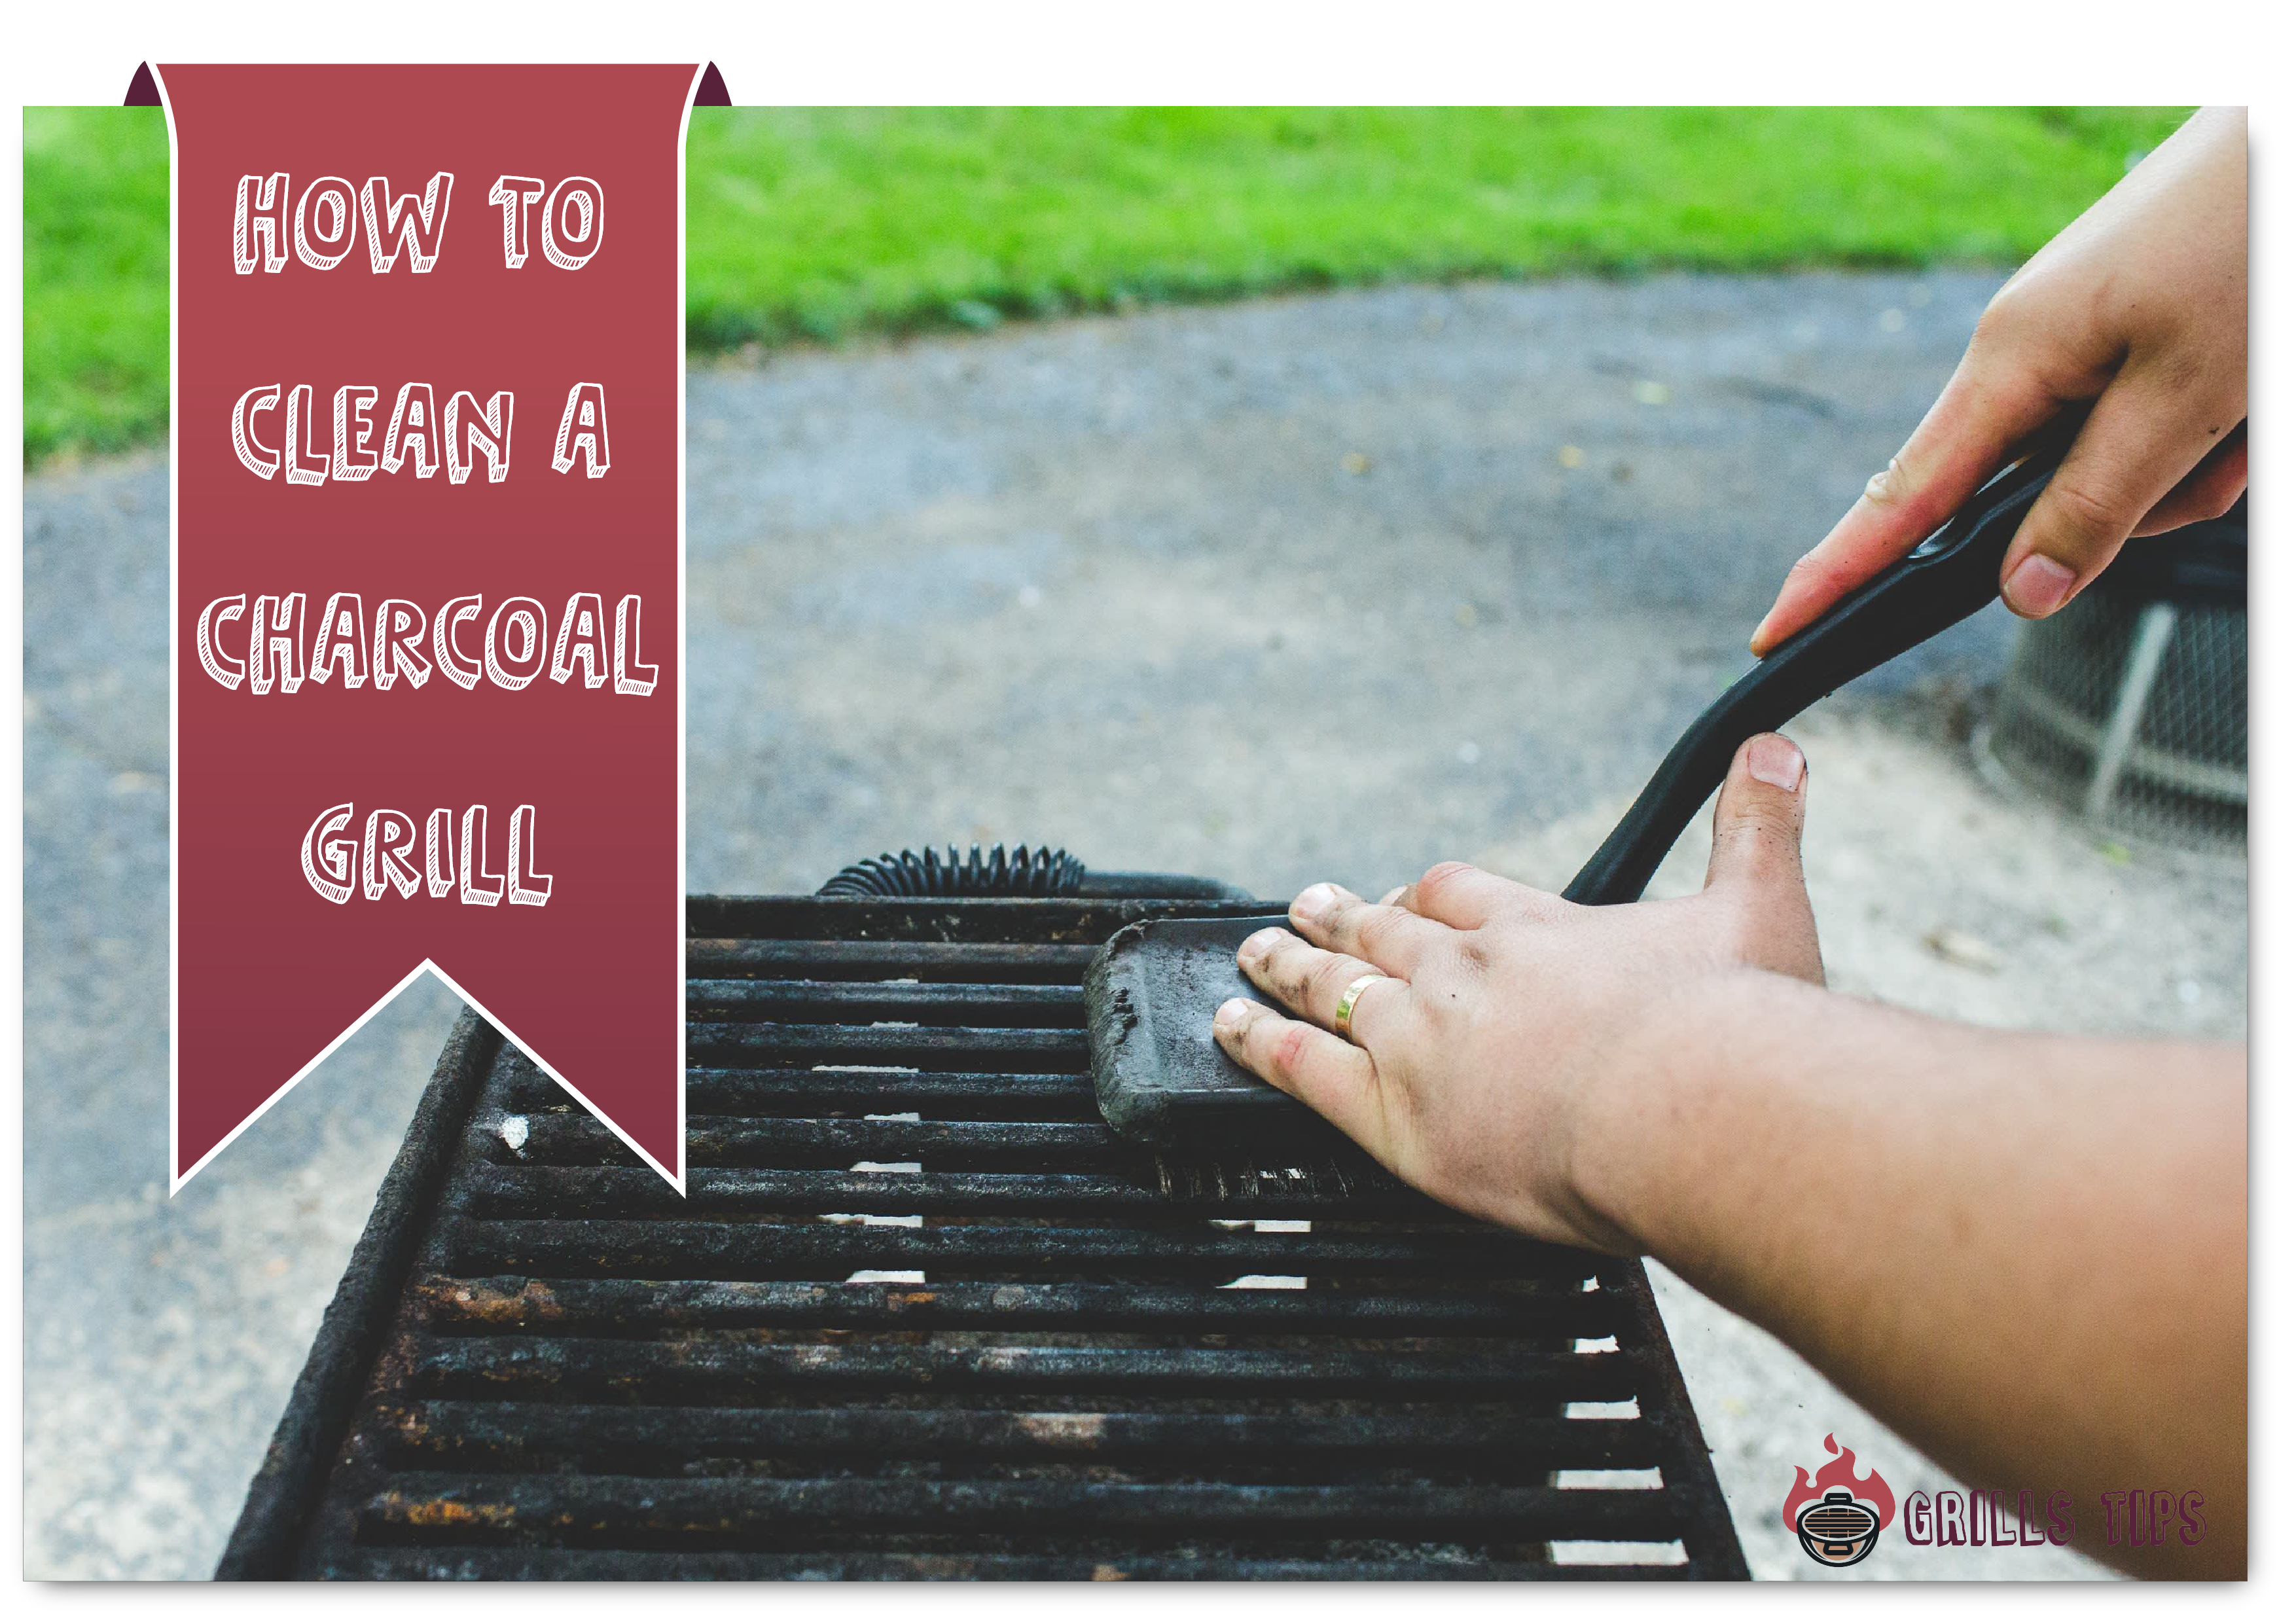 How To Clean A Charcoal Grill